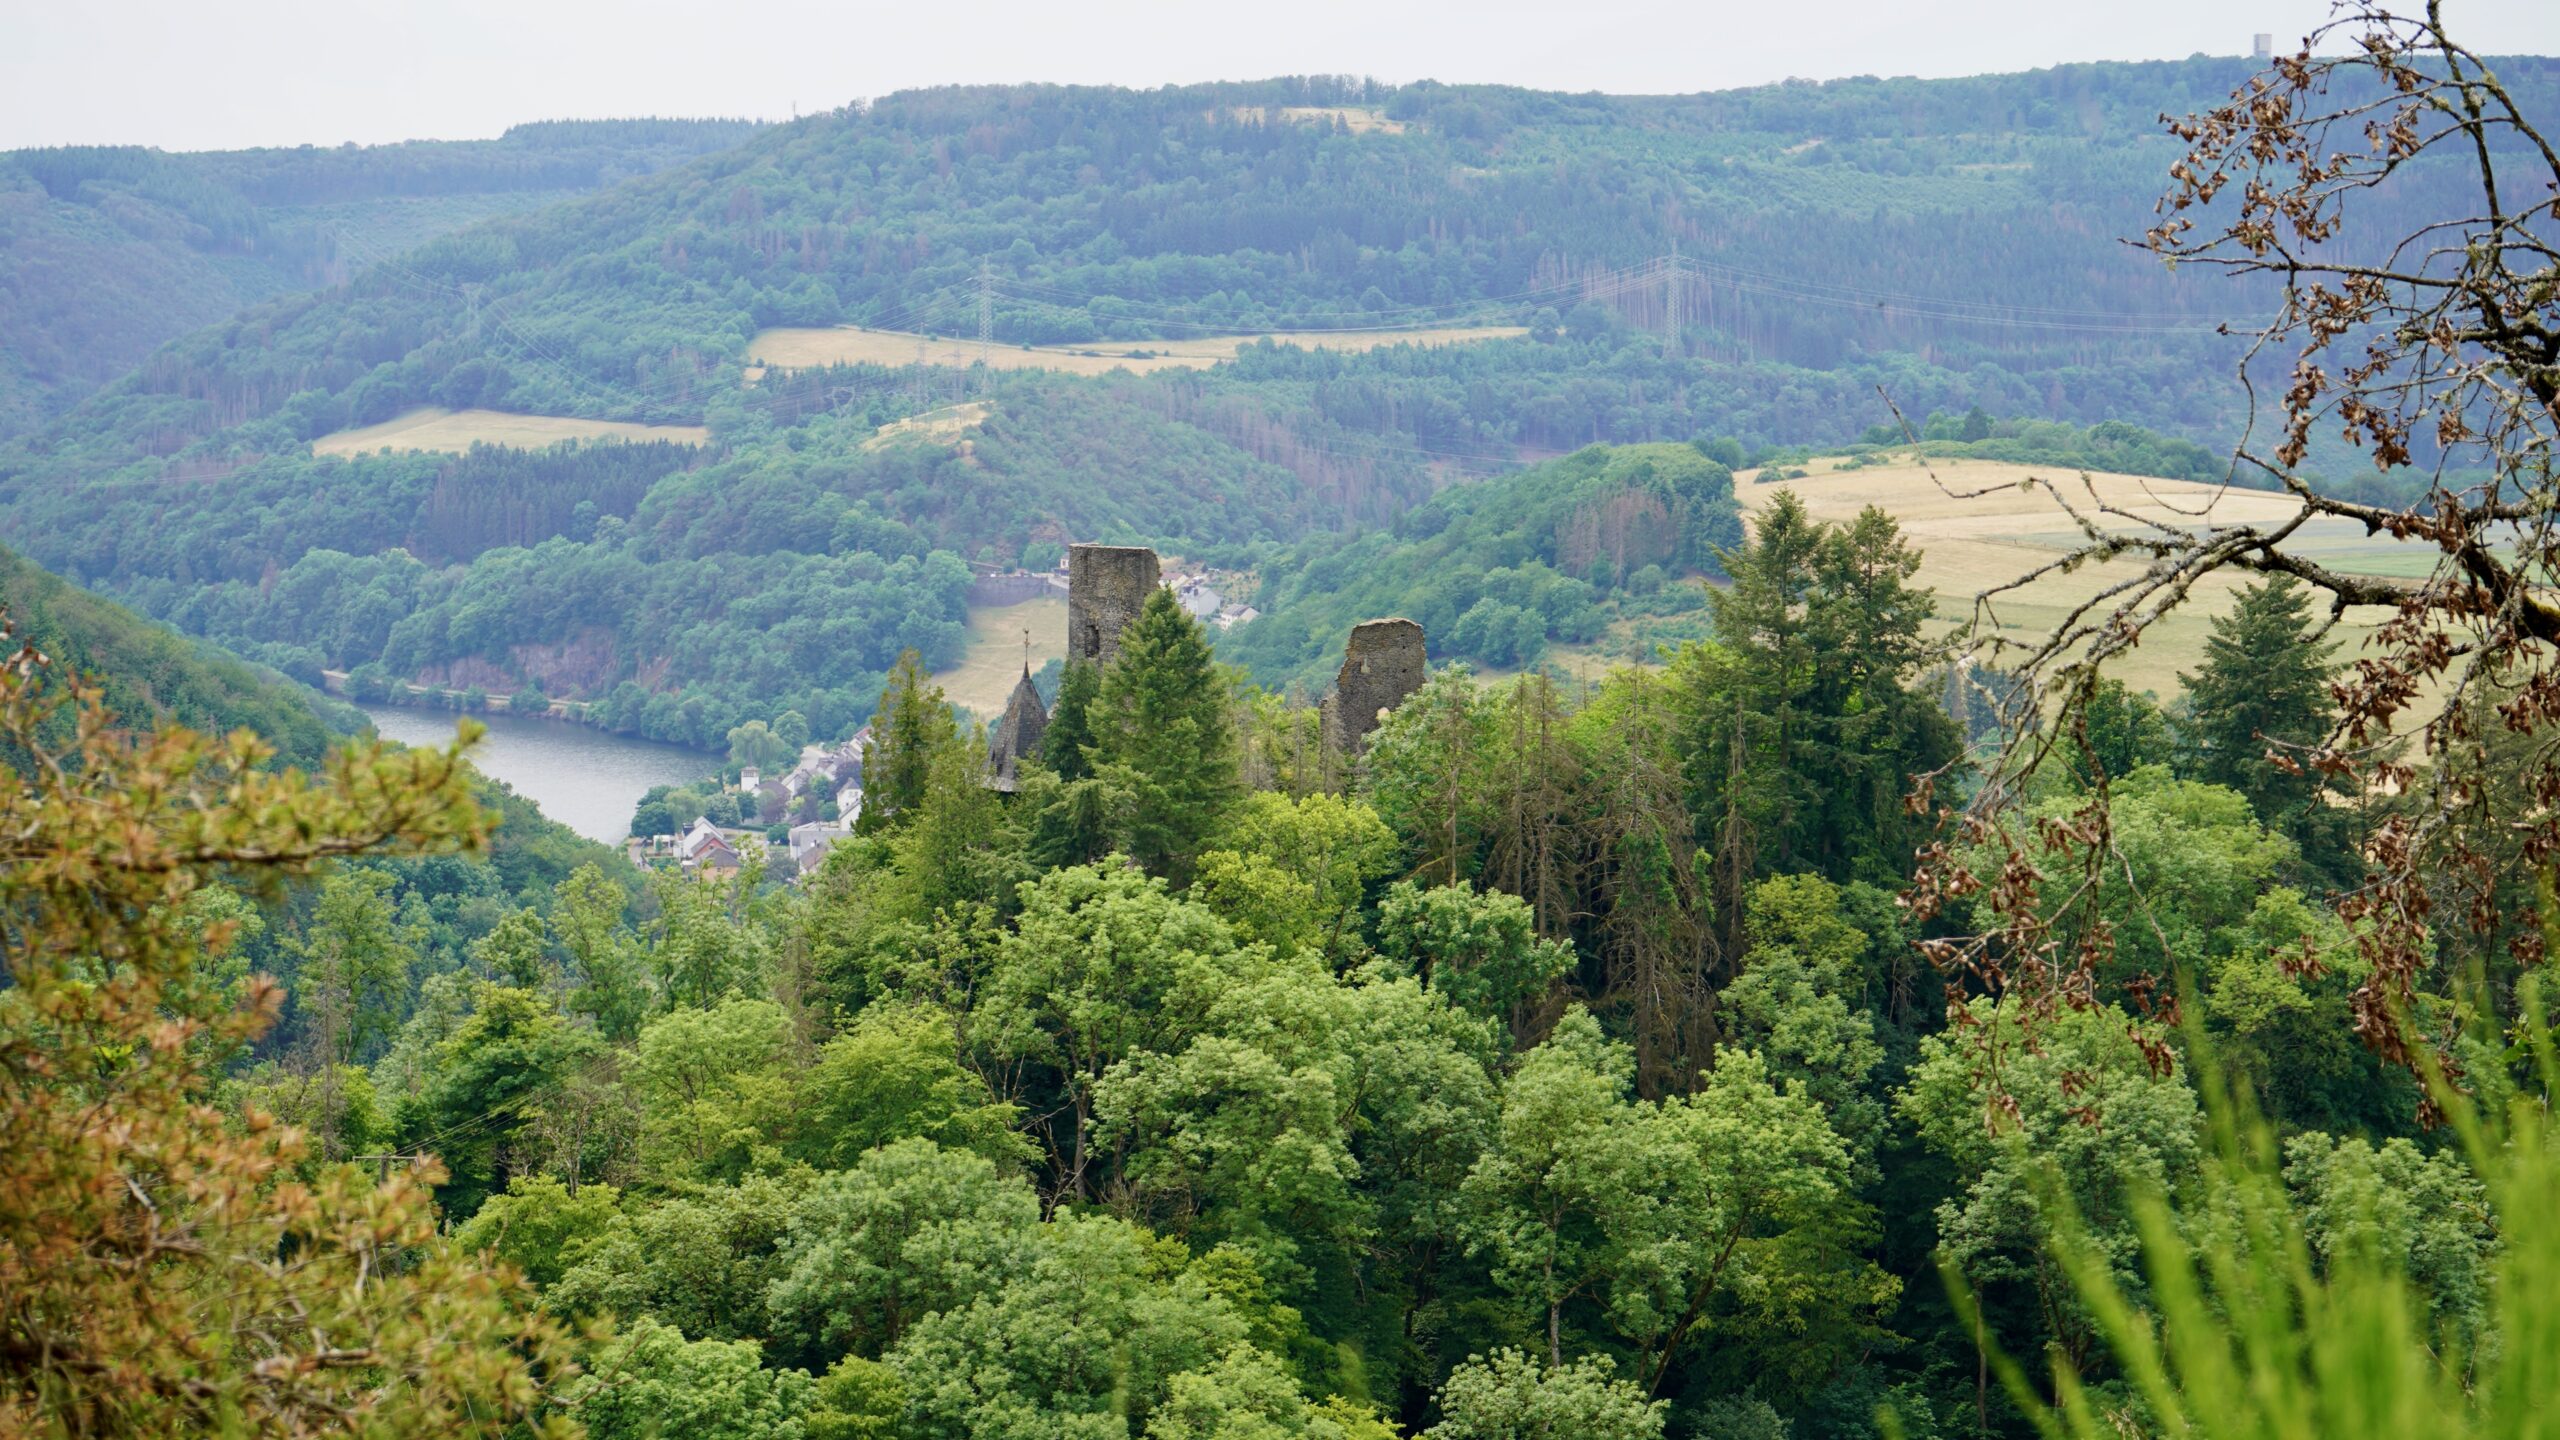 a green forest and our river behind falkenstein castle spires poking out of the forest